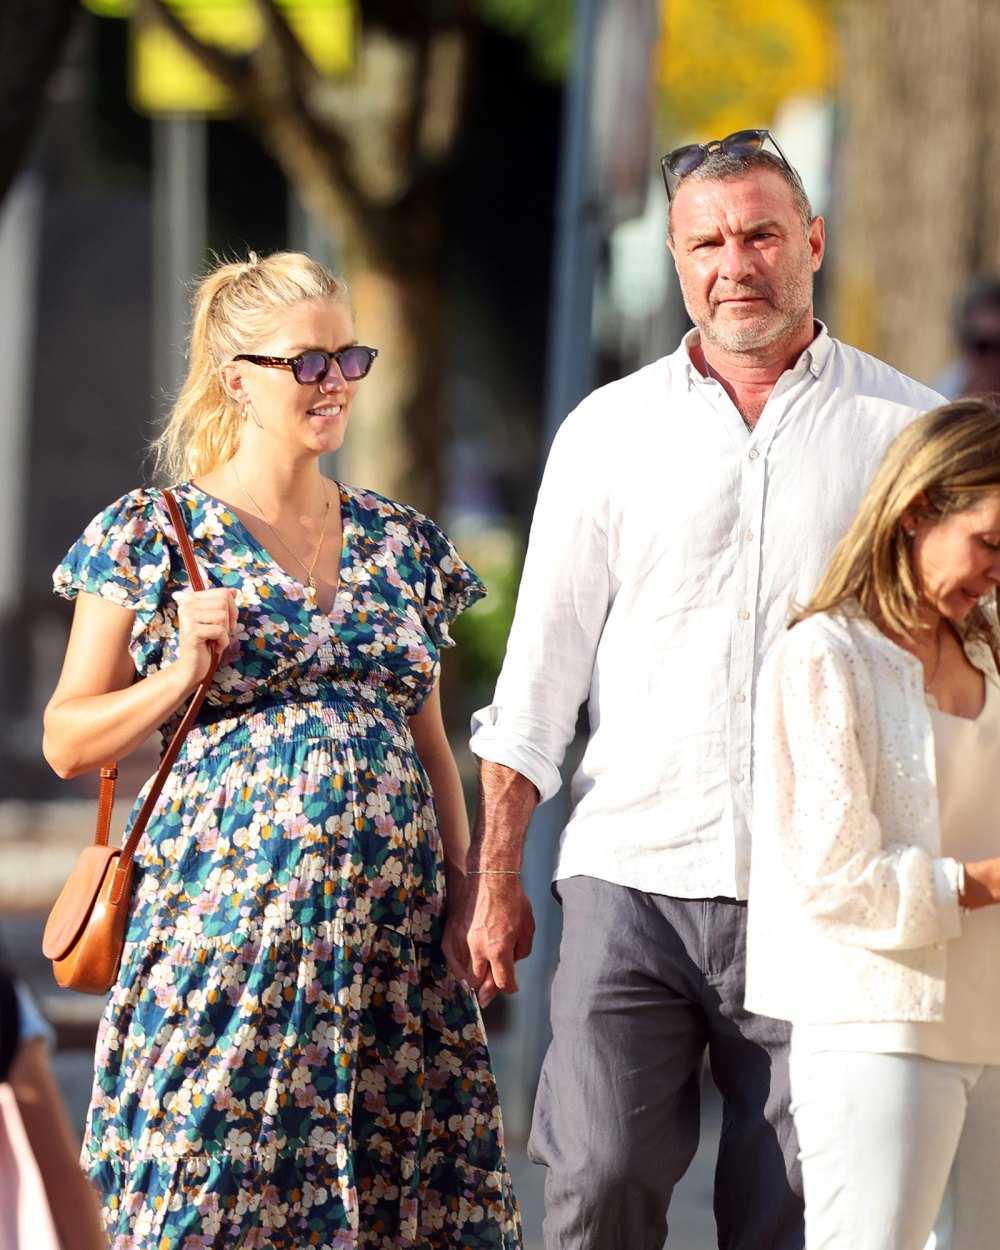 Liev Schreiber and Pregnant Taylor Neisen Step Out in the Hamptons Amid Marriage Reports 267